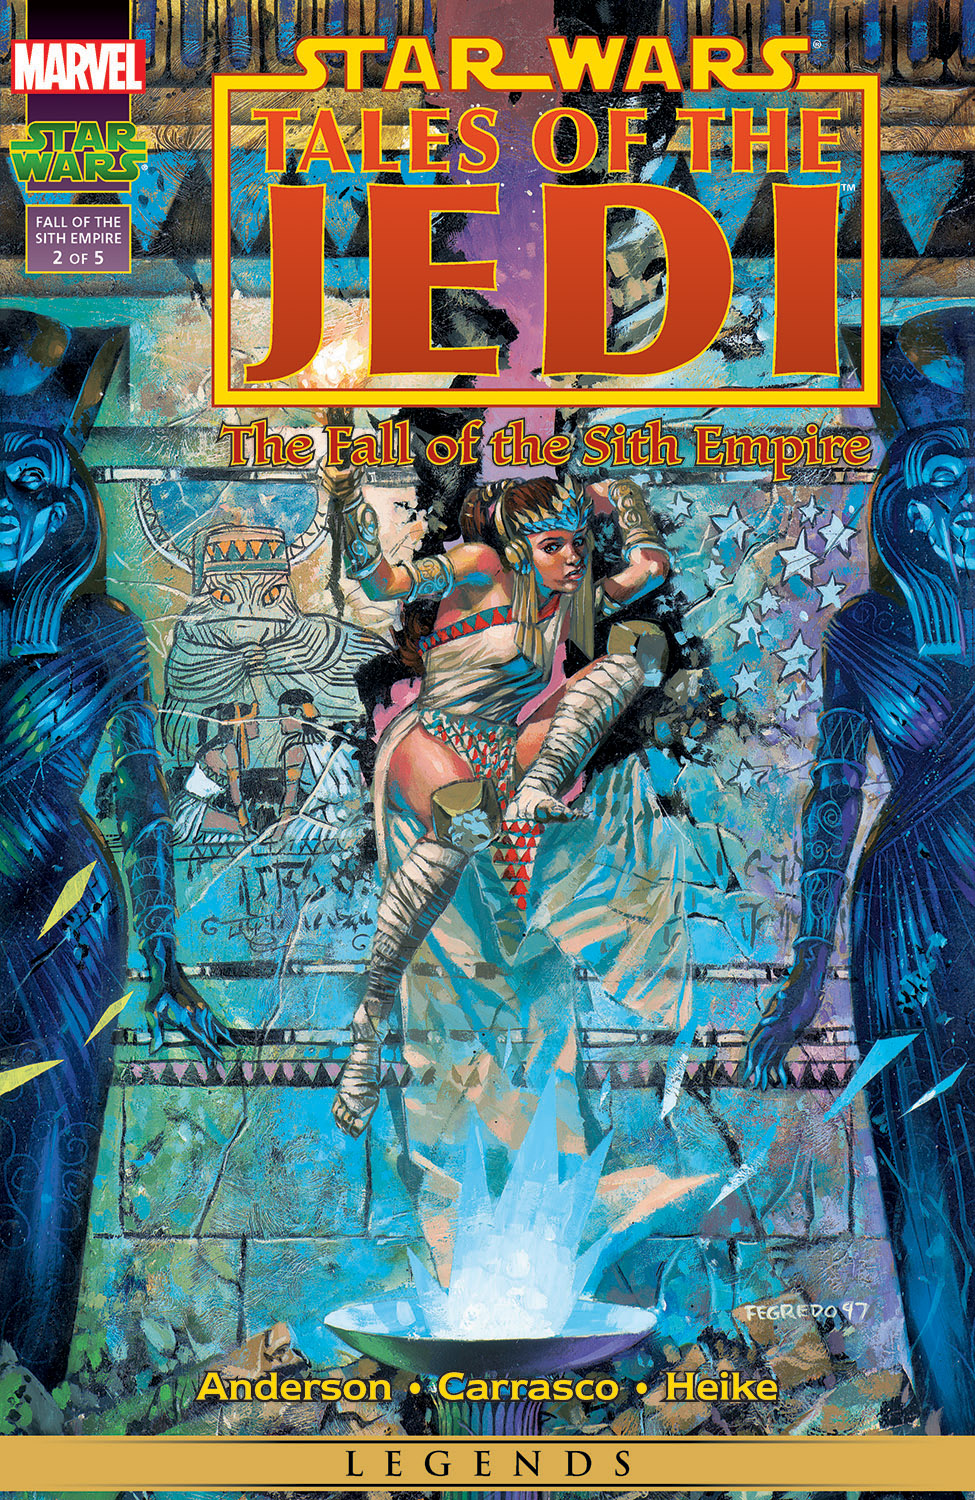 Star Wars: Tales of the Jedi - The Fall of the Sith Empire (1997) #2